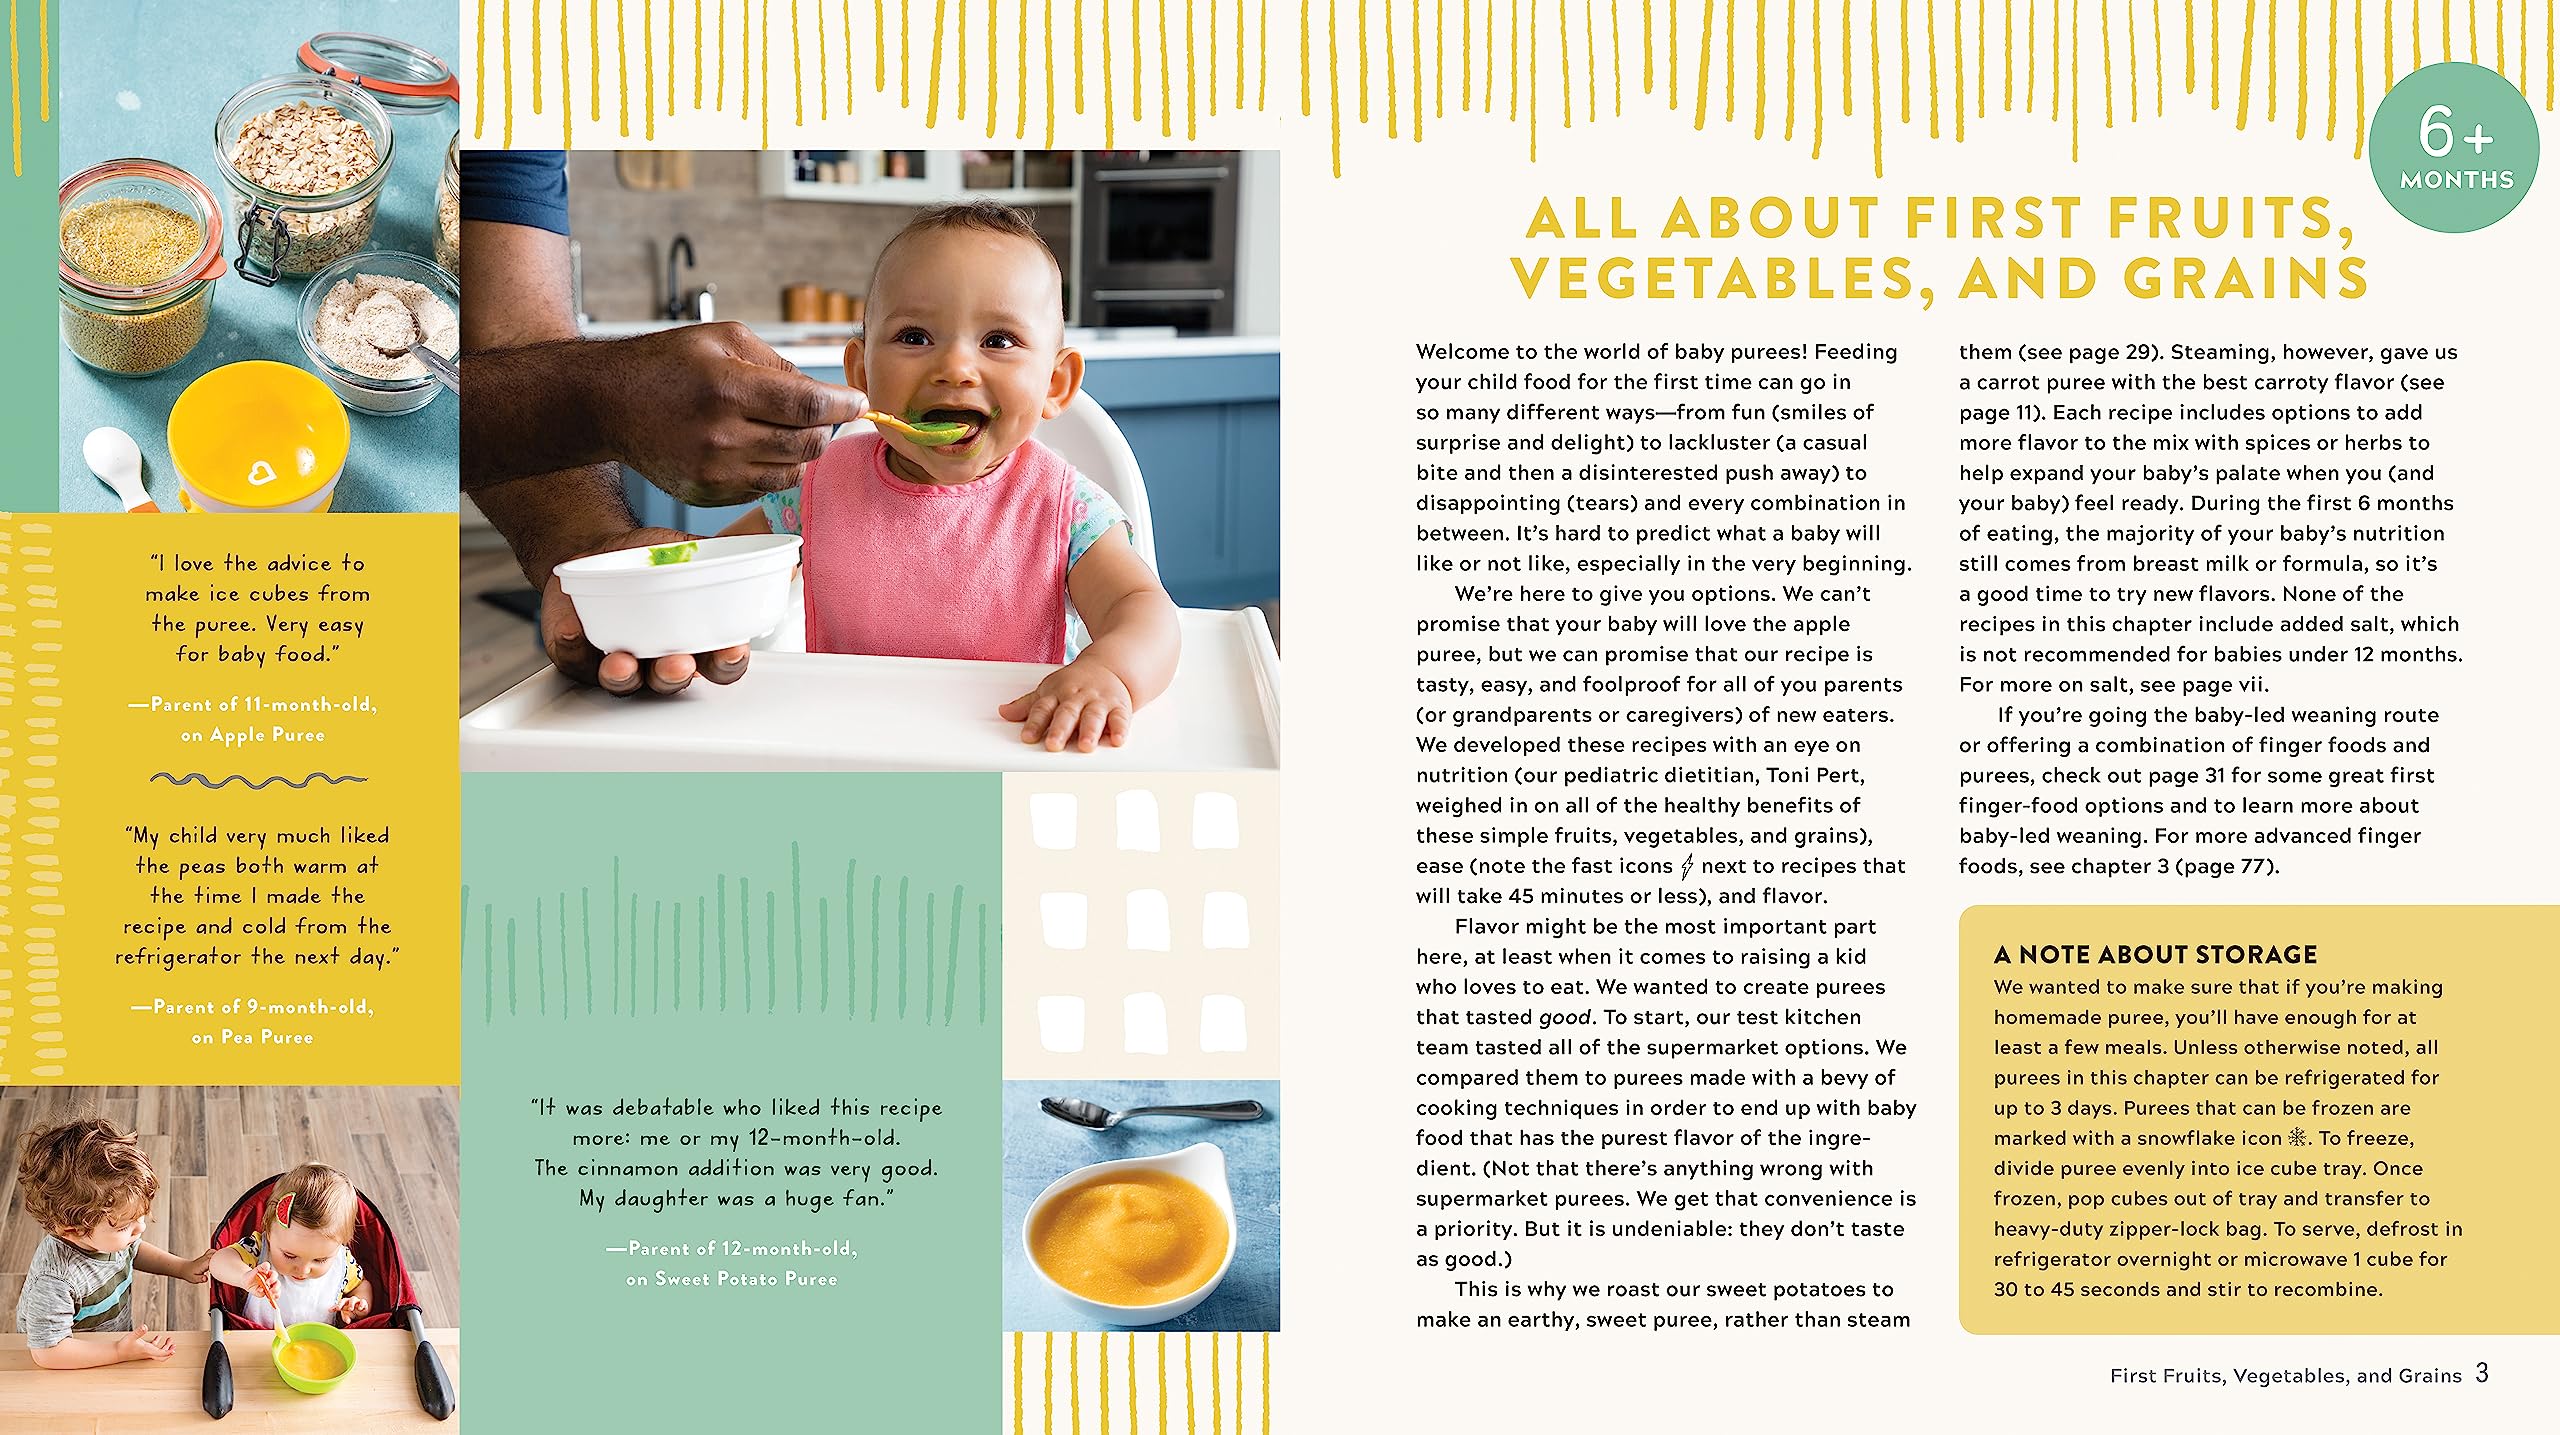 The Complete Baby and Toddler Cookbook: The Very Best Baby and Toddler Food Recipe Book (America's Test Kitchen Kids)